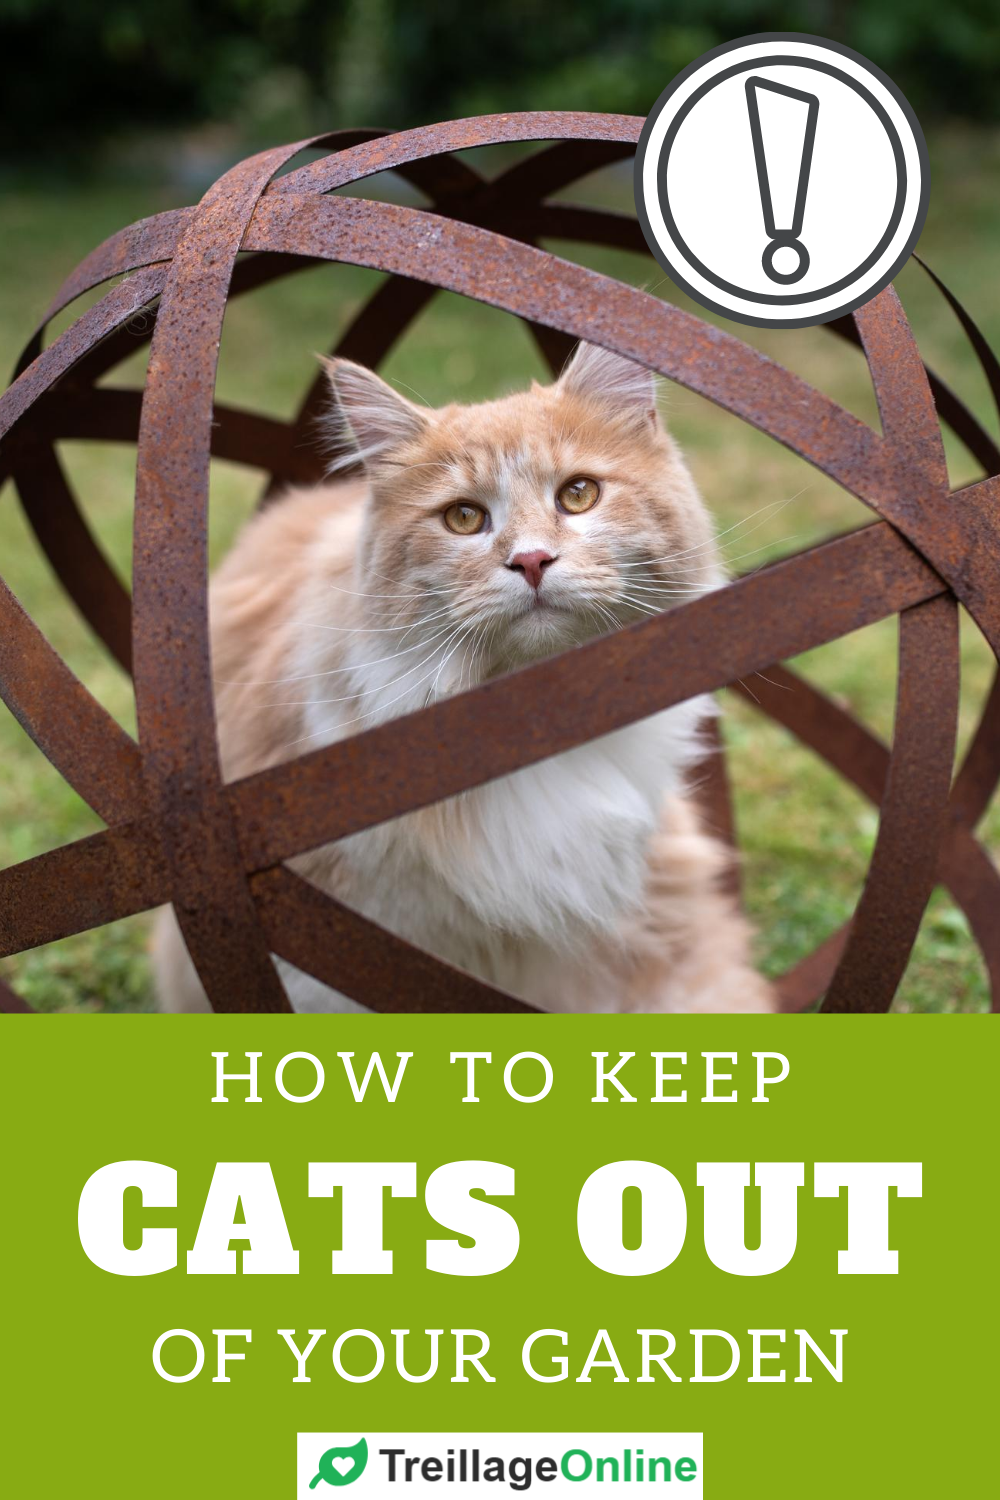 5 Ways to Keep Cats Out of Your Yard